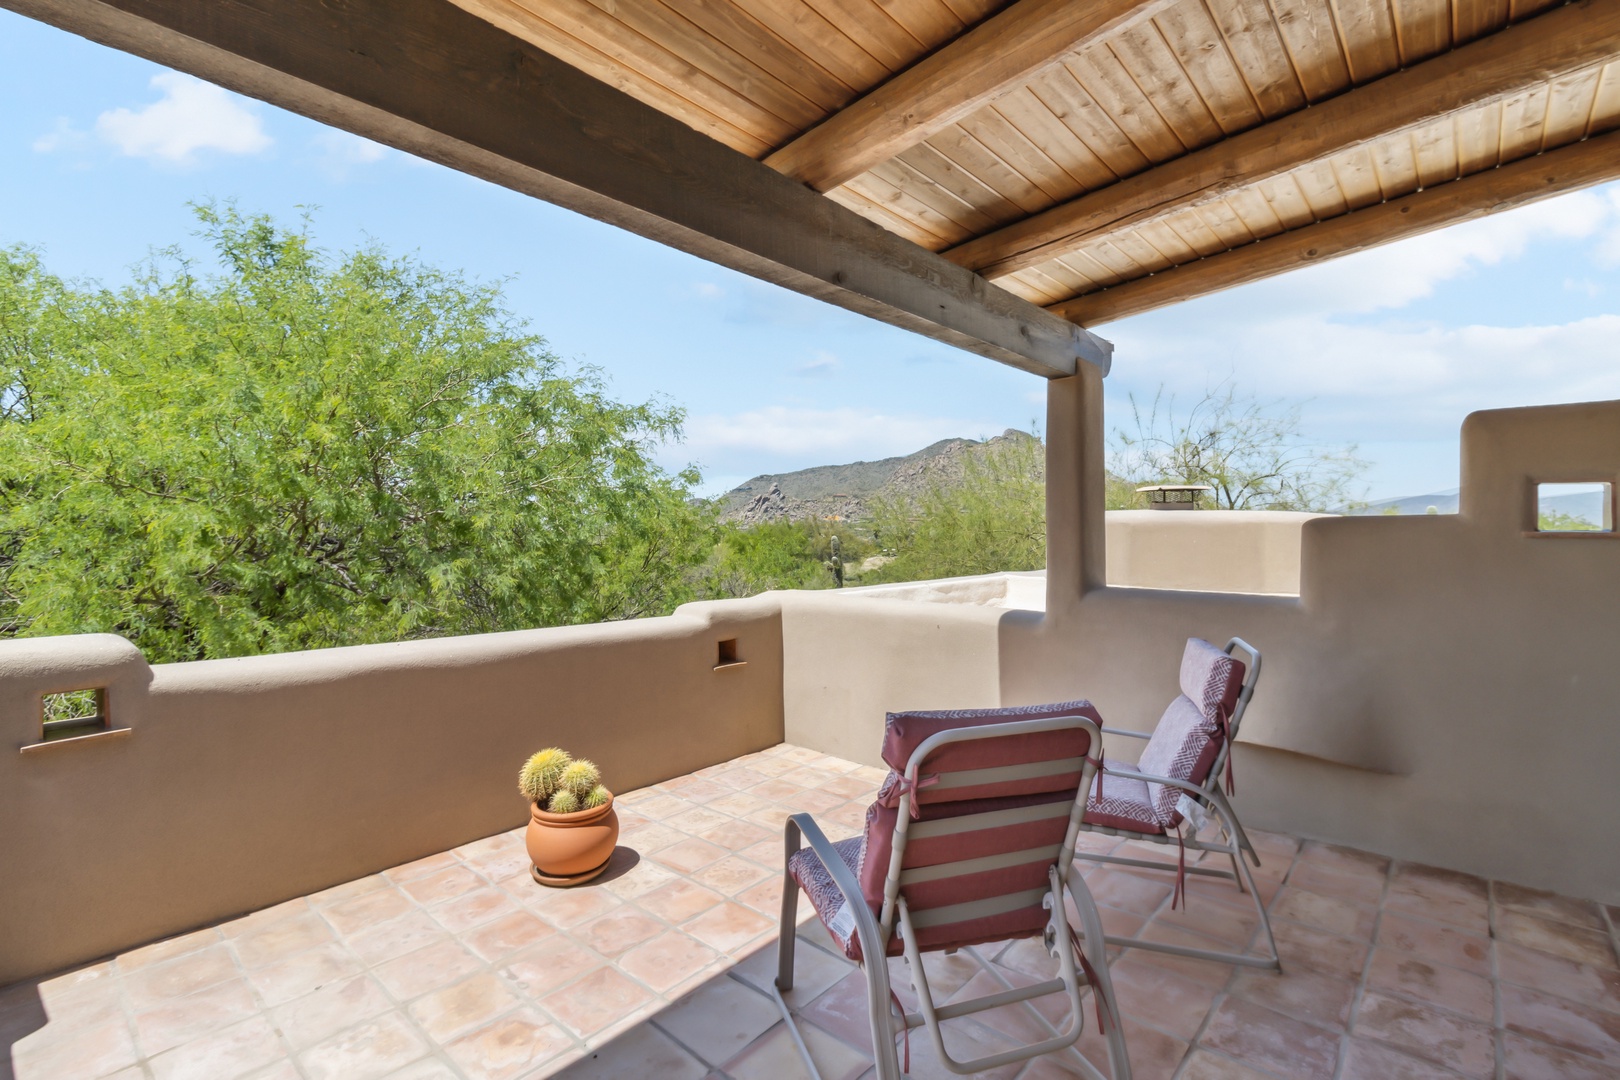 Scottsdale Vacation Rentals, Boulders Hideaway Villa - Delightful patio off the second guest bedroom where you can enjoy some vitamin D and a cup of coffee